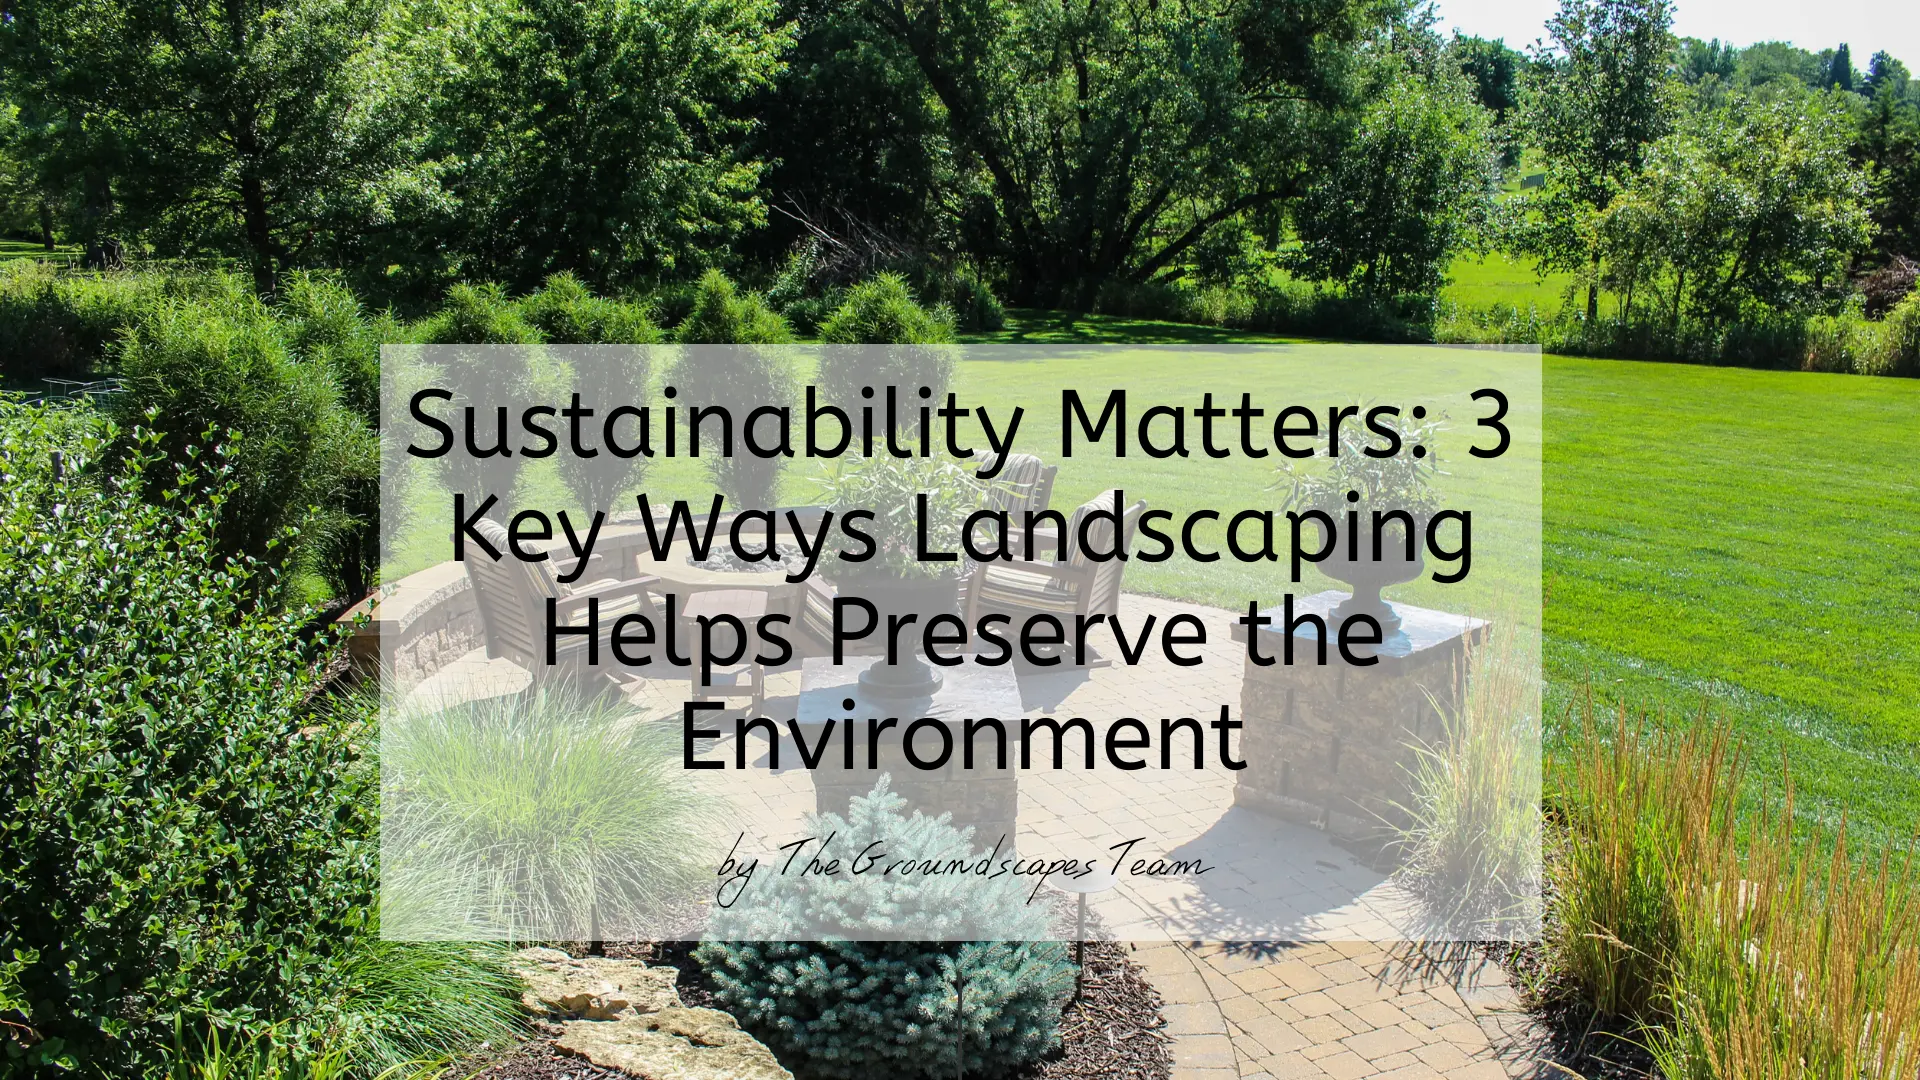 Sustainability Matters: 3 Key Ways Landscaping Helps Preserve the Environment